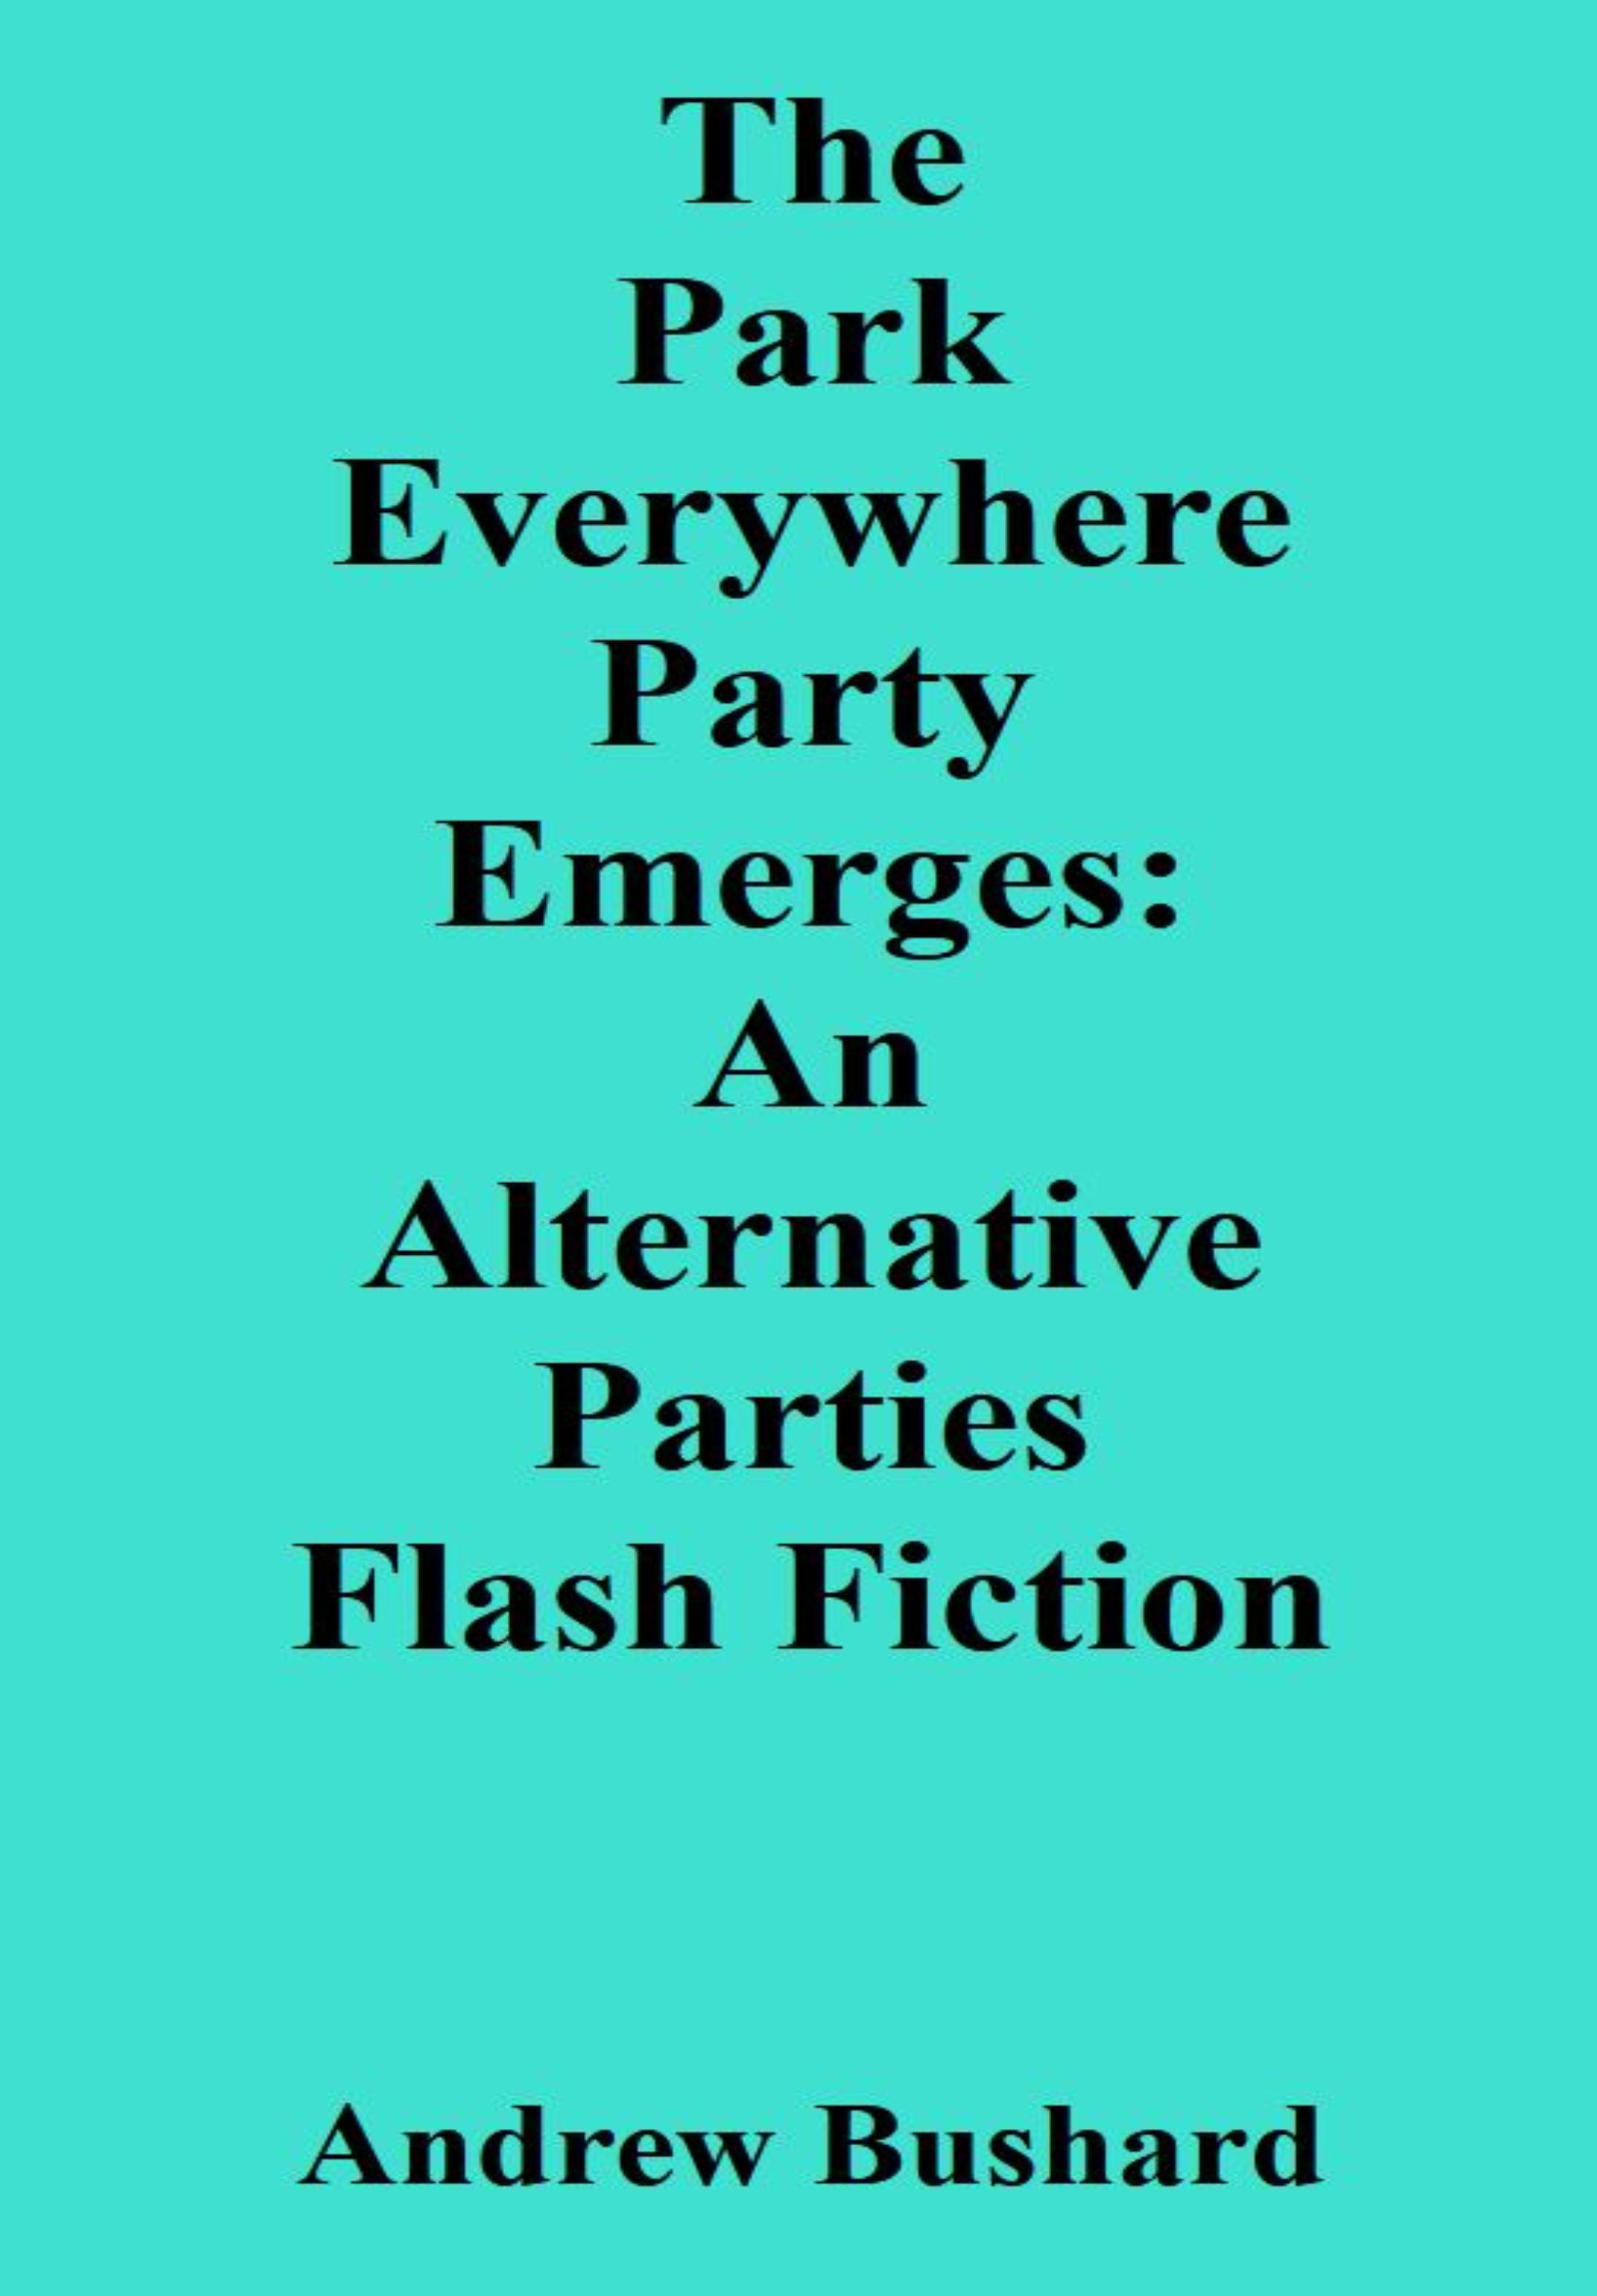 The Park Everywhere Party Emerges: An Alternative Parties Flash Fiction